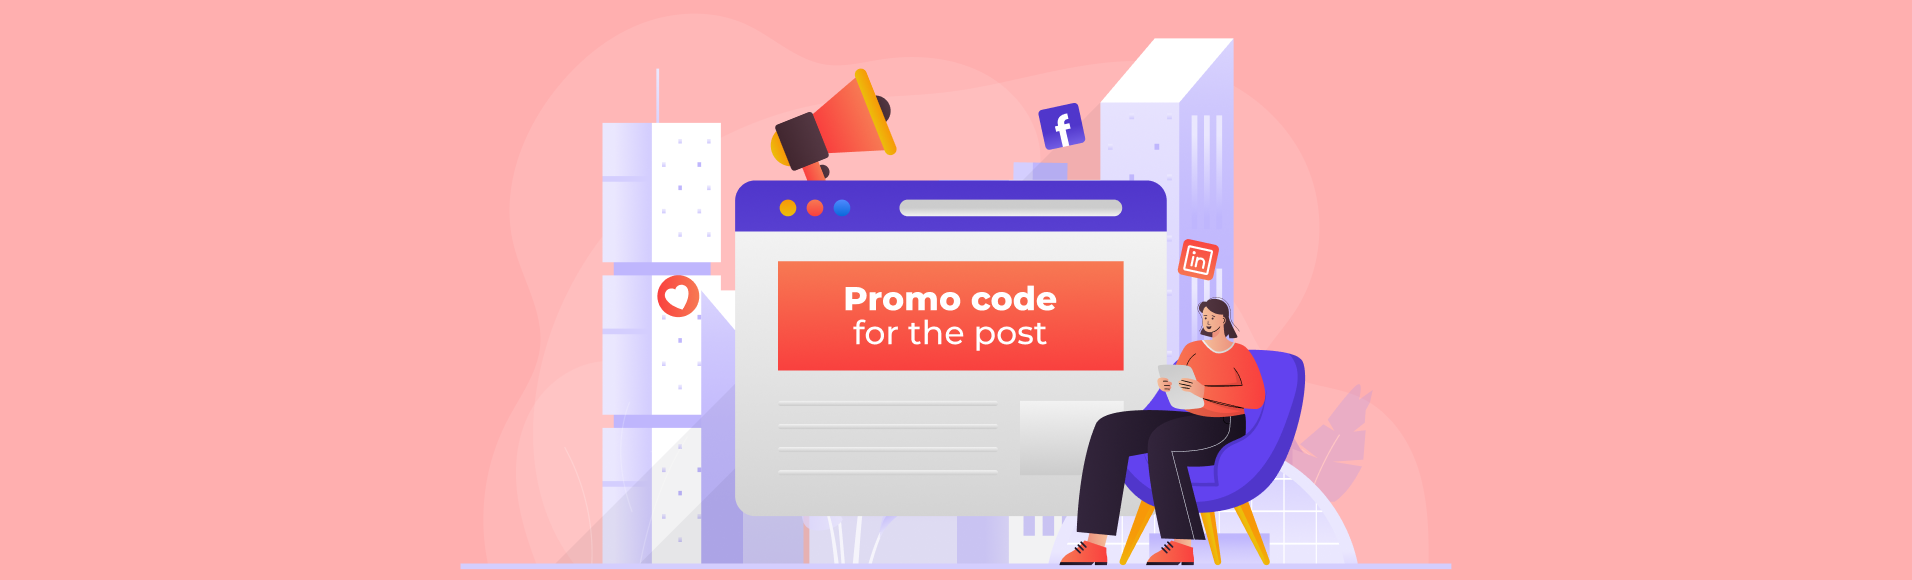 Terms of the marketing program “Promo code for the post”